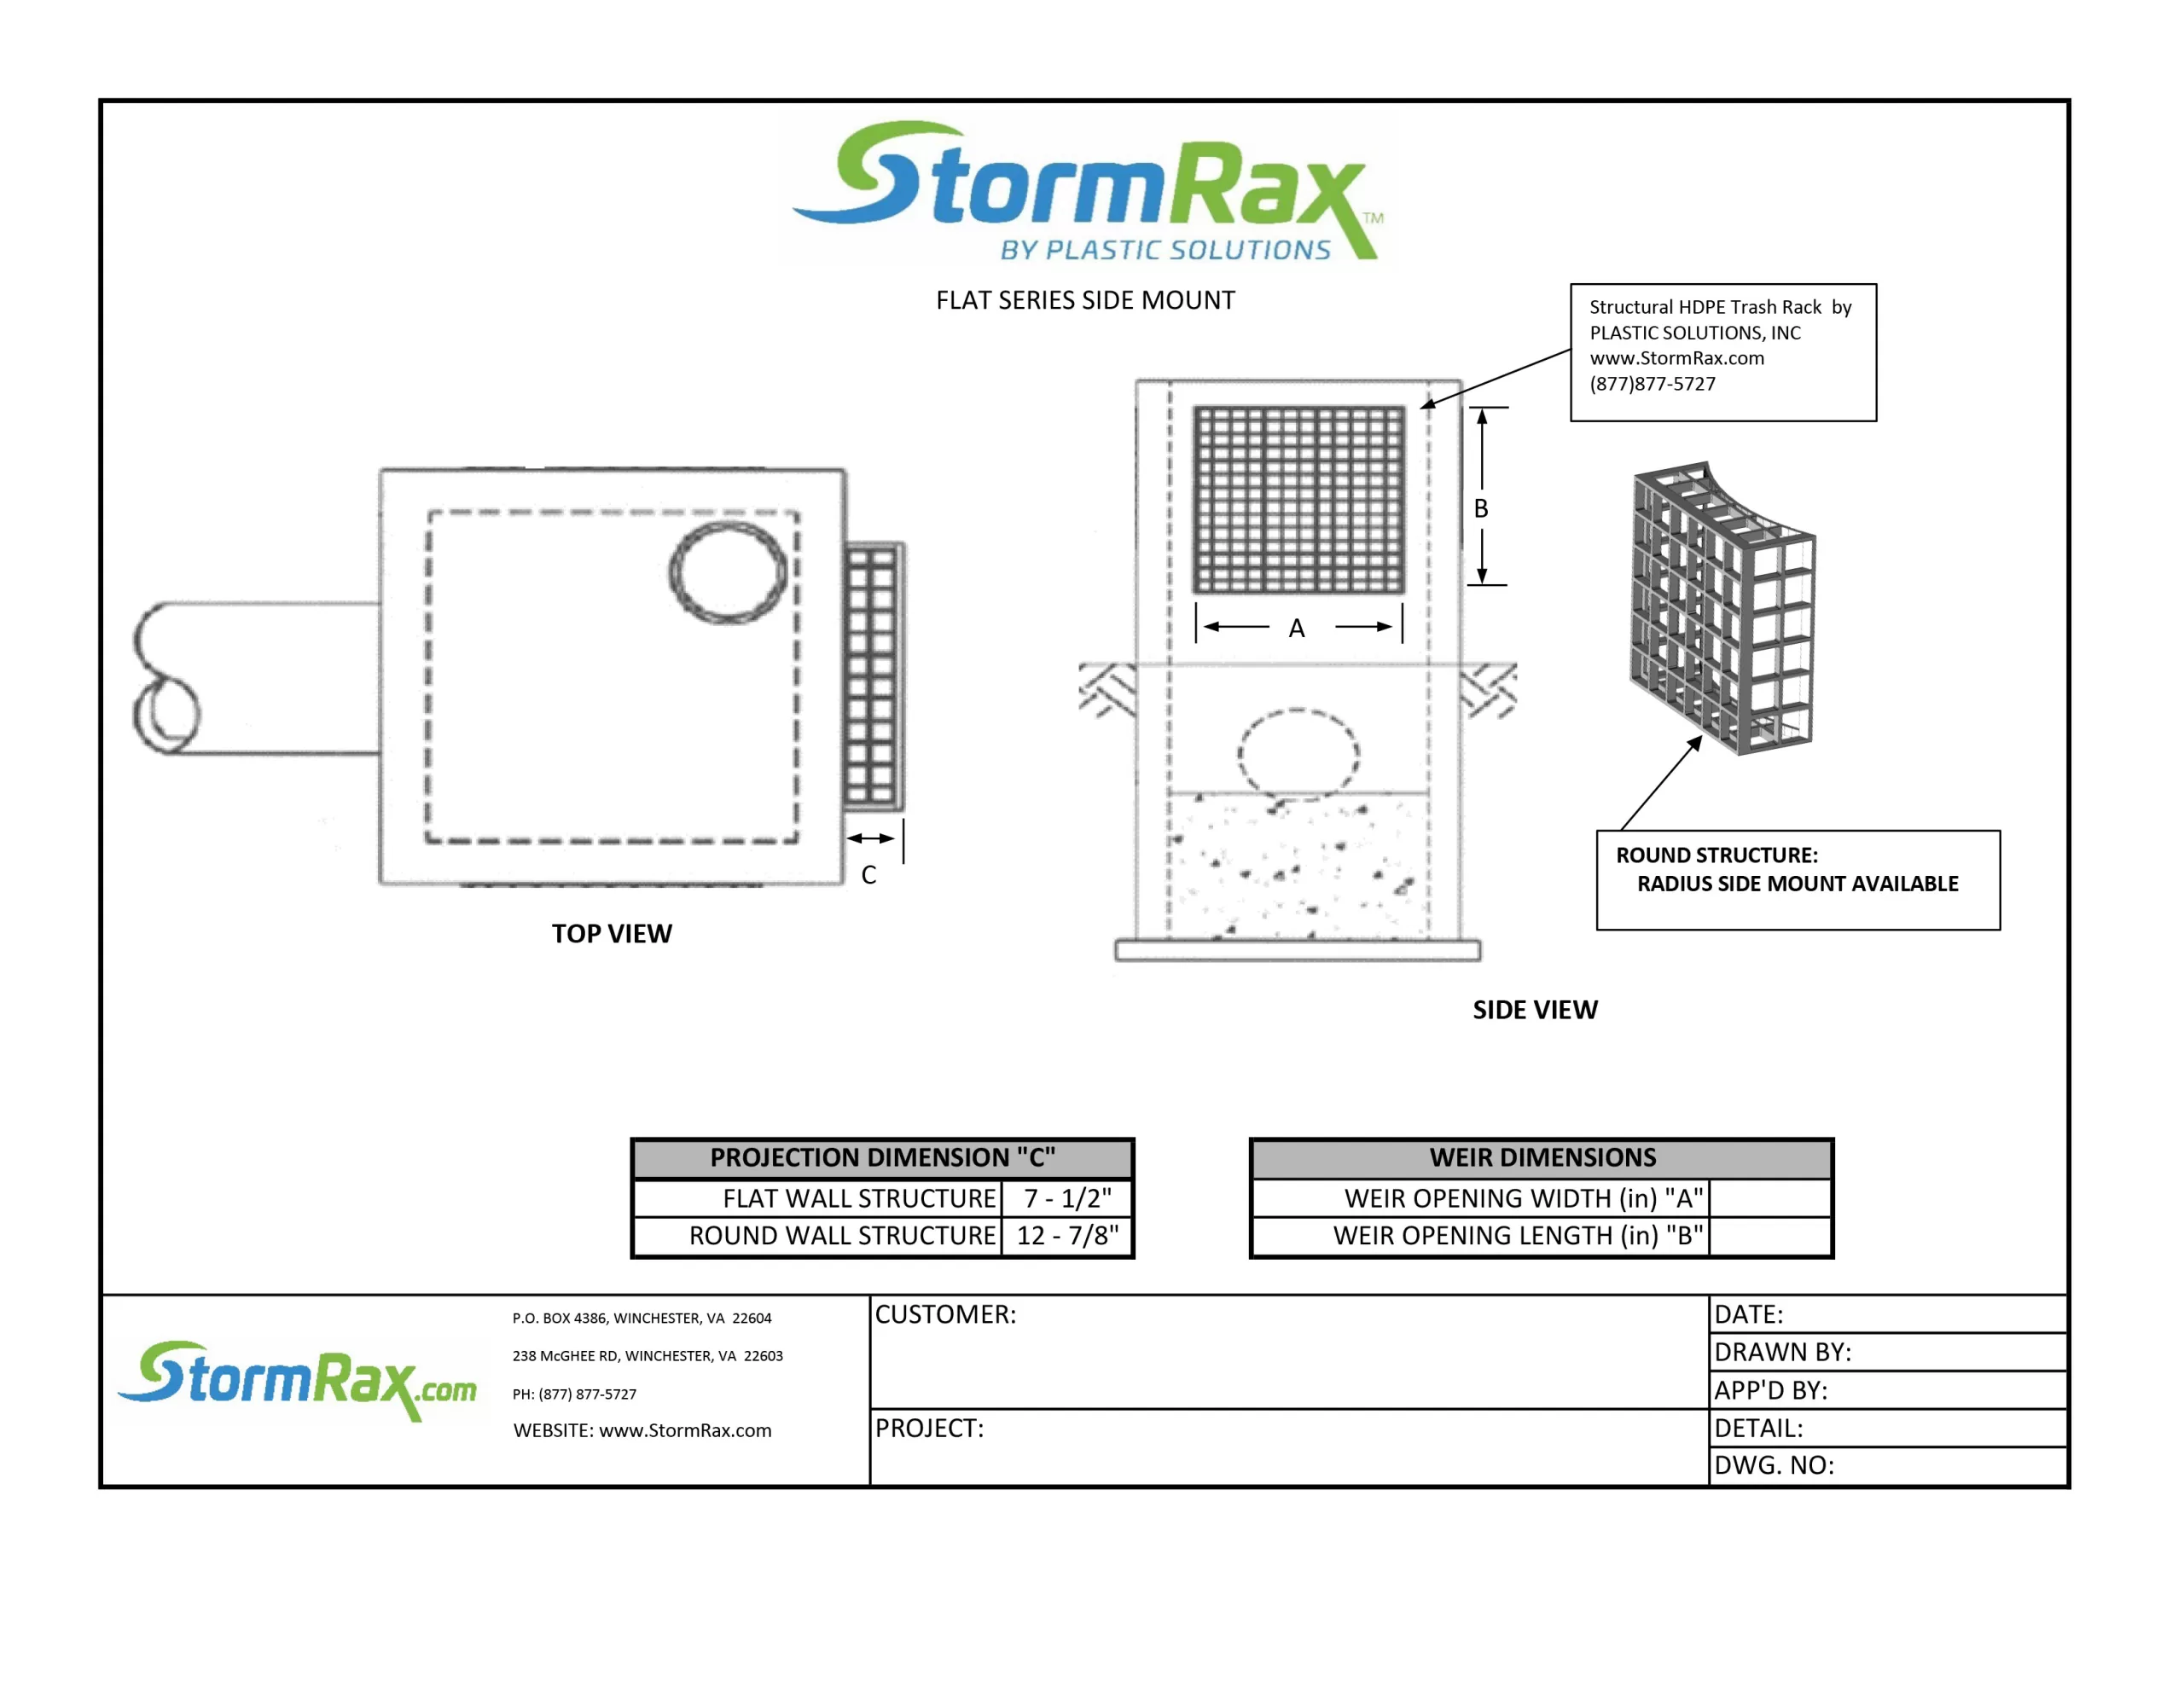 Technical drawing for stormrax flat series